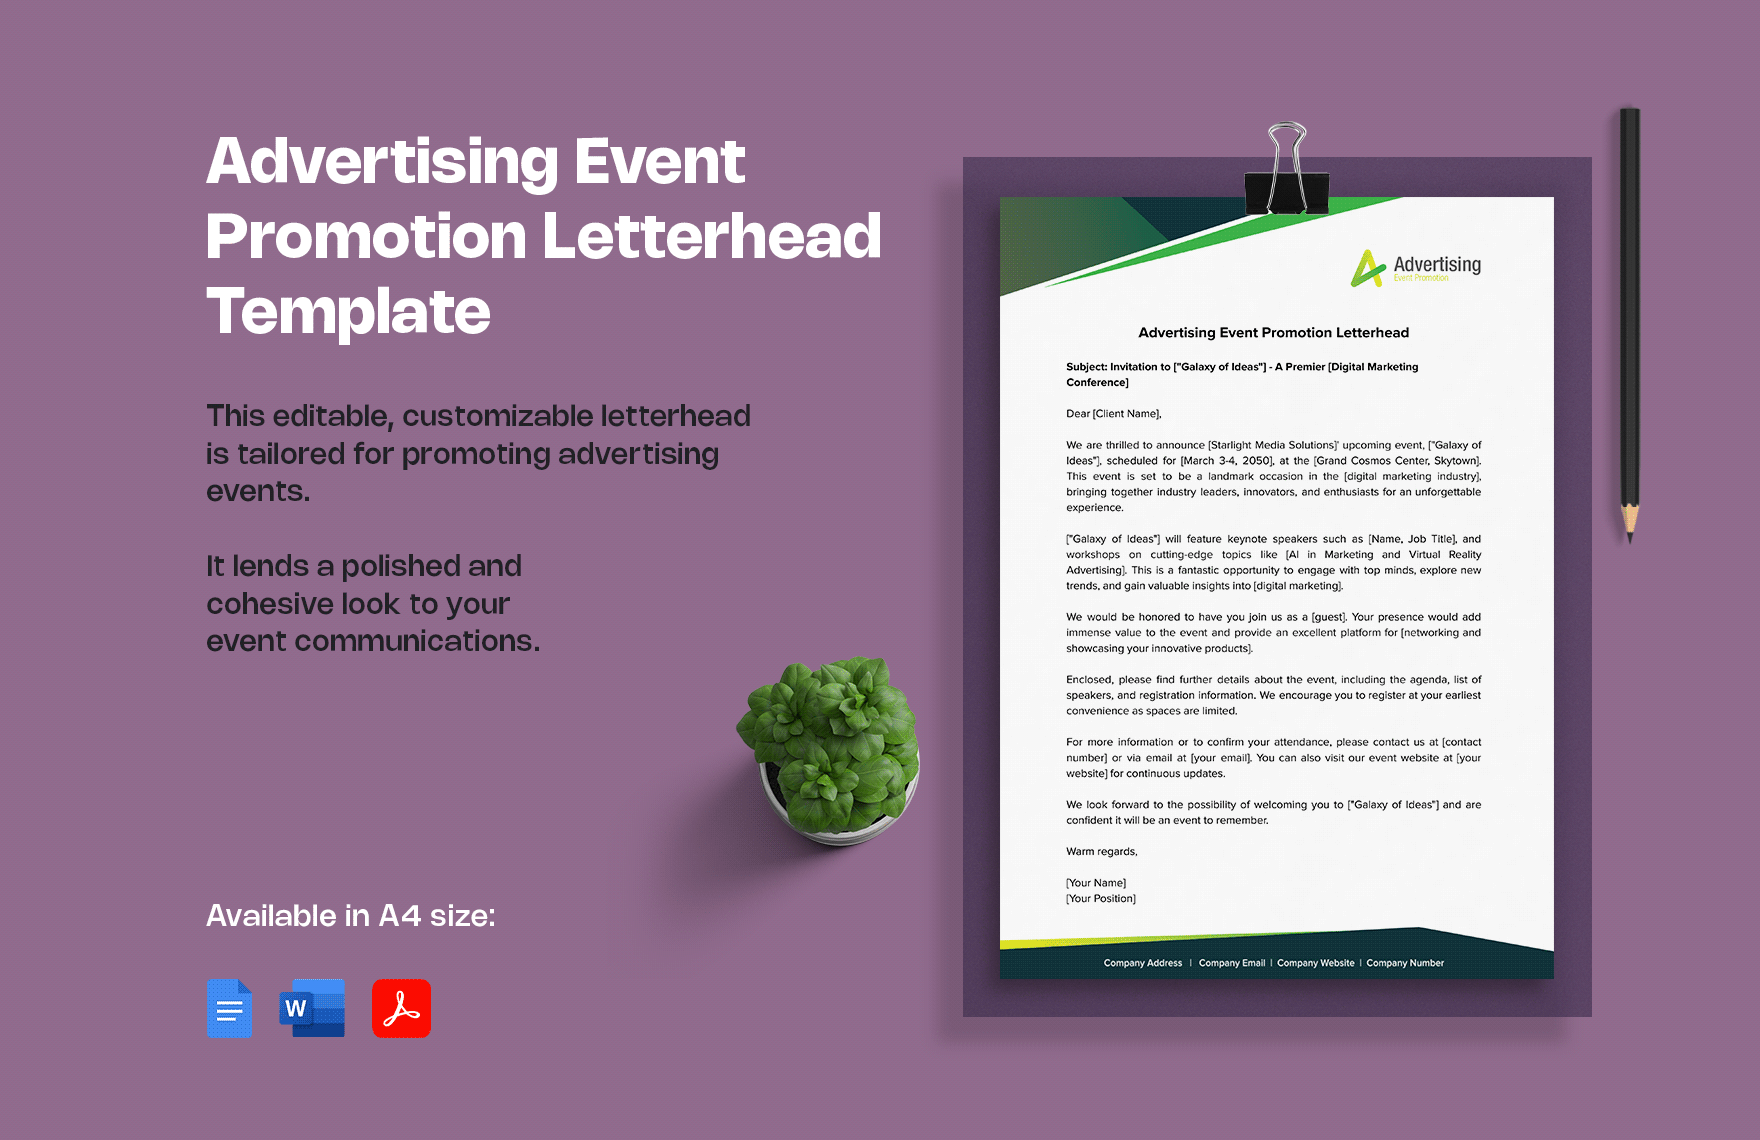 Advertising Event Promotion Letterhead Template